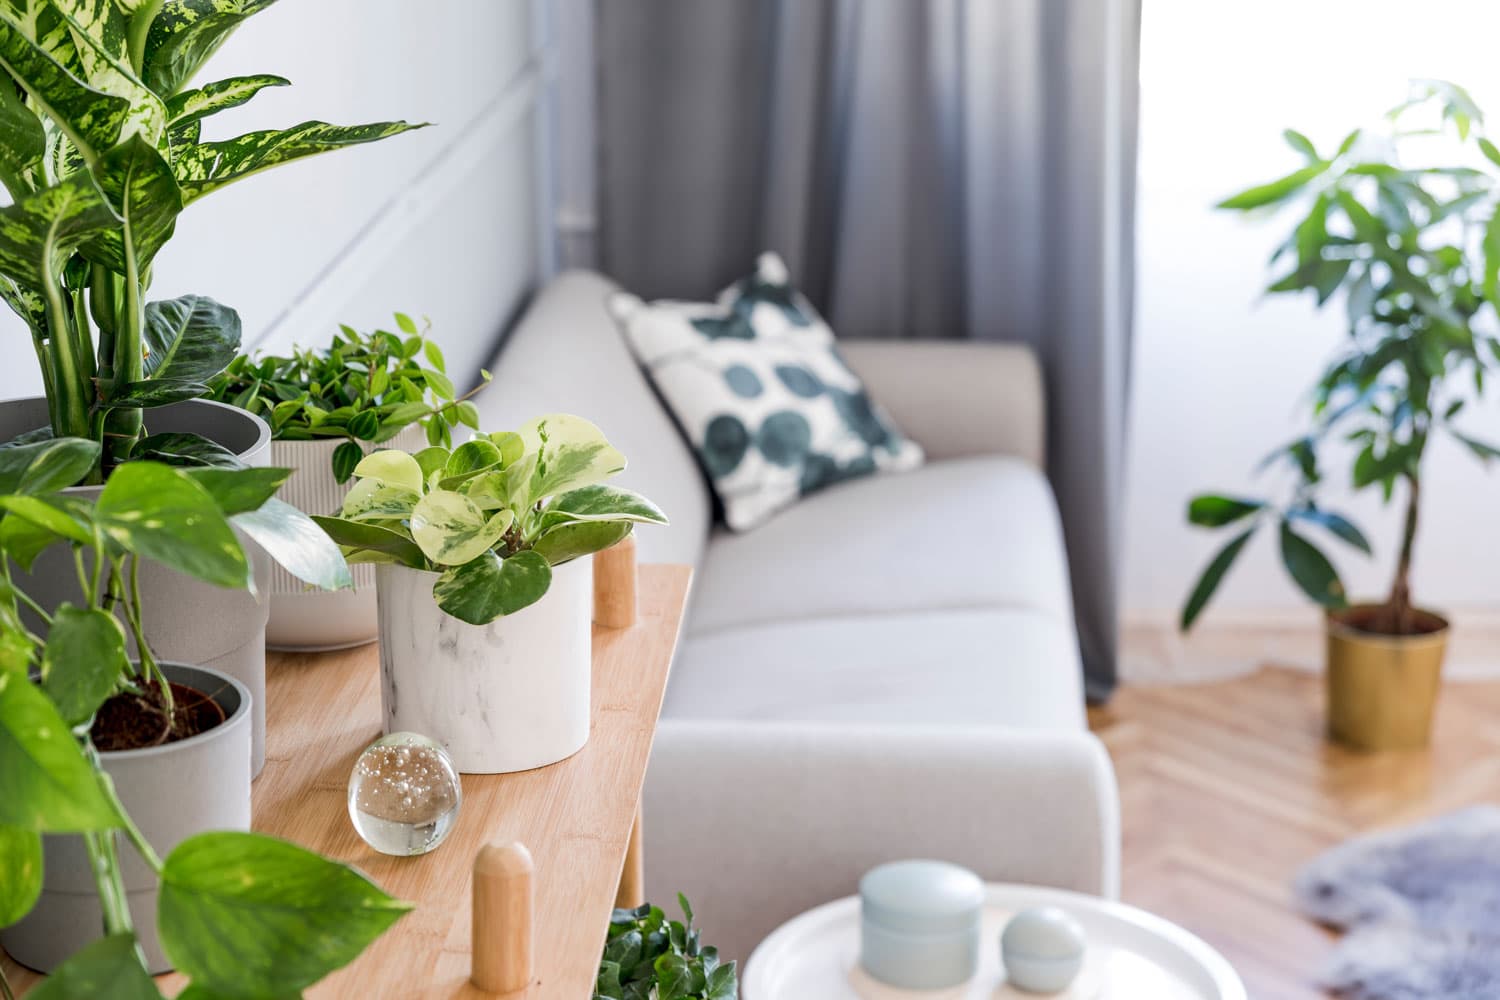 Putting indoor plants inside the house